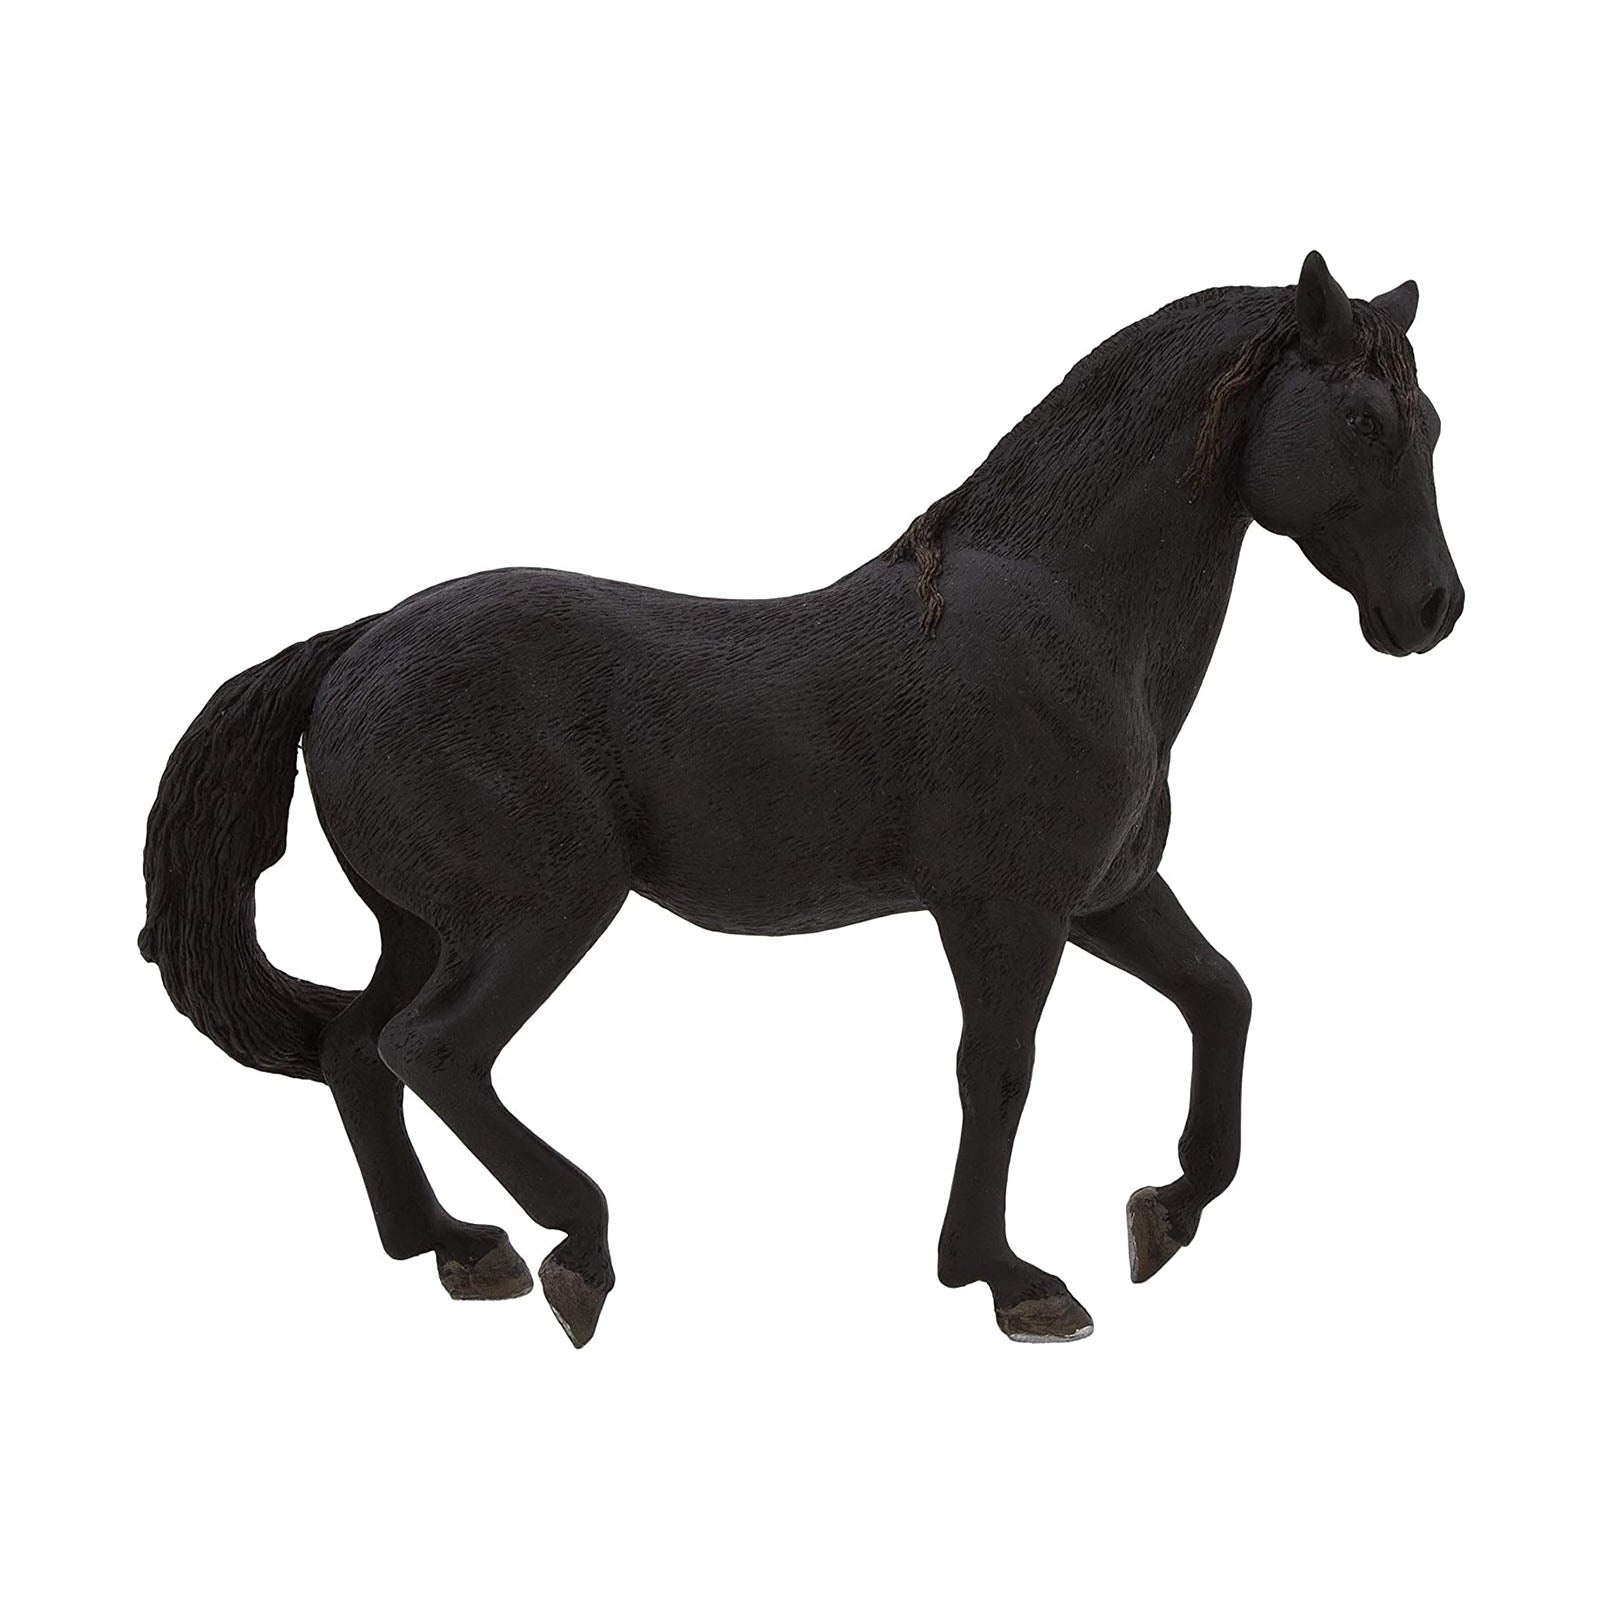 Schleich Horse Club Andalusian Stallion Animal Figure